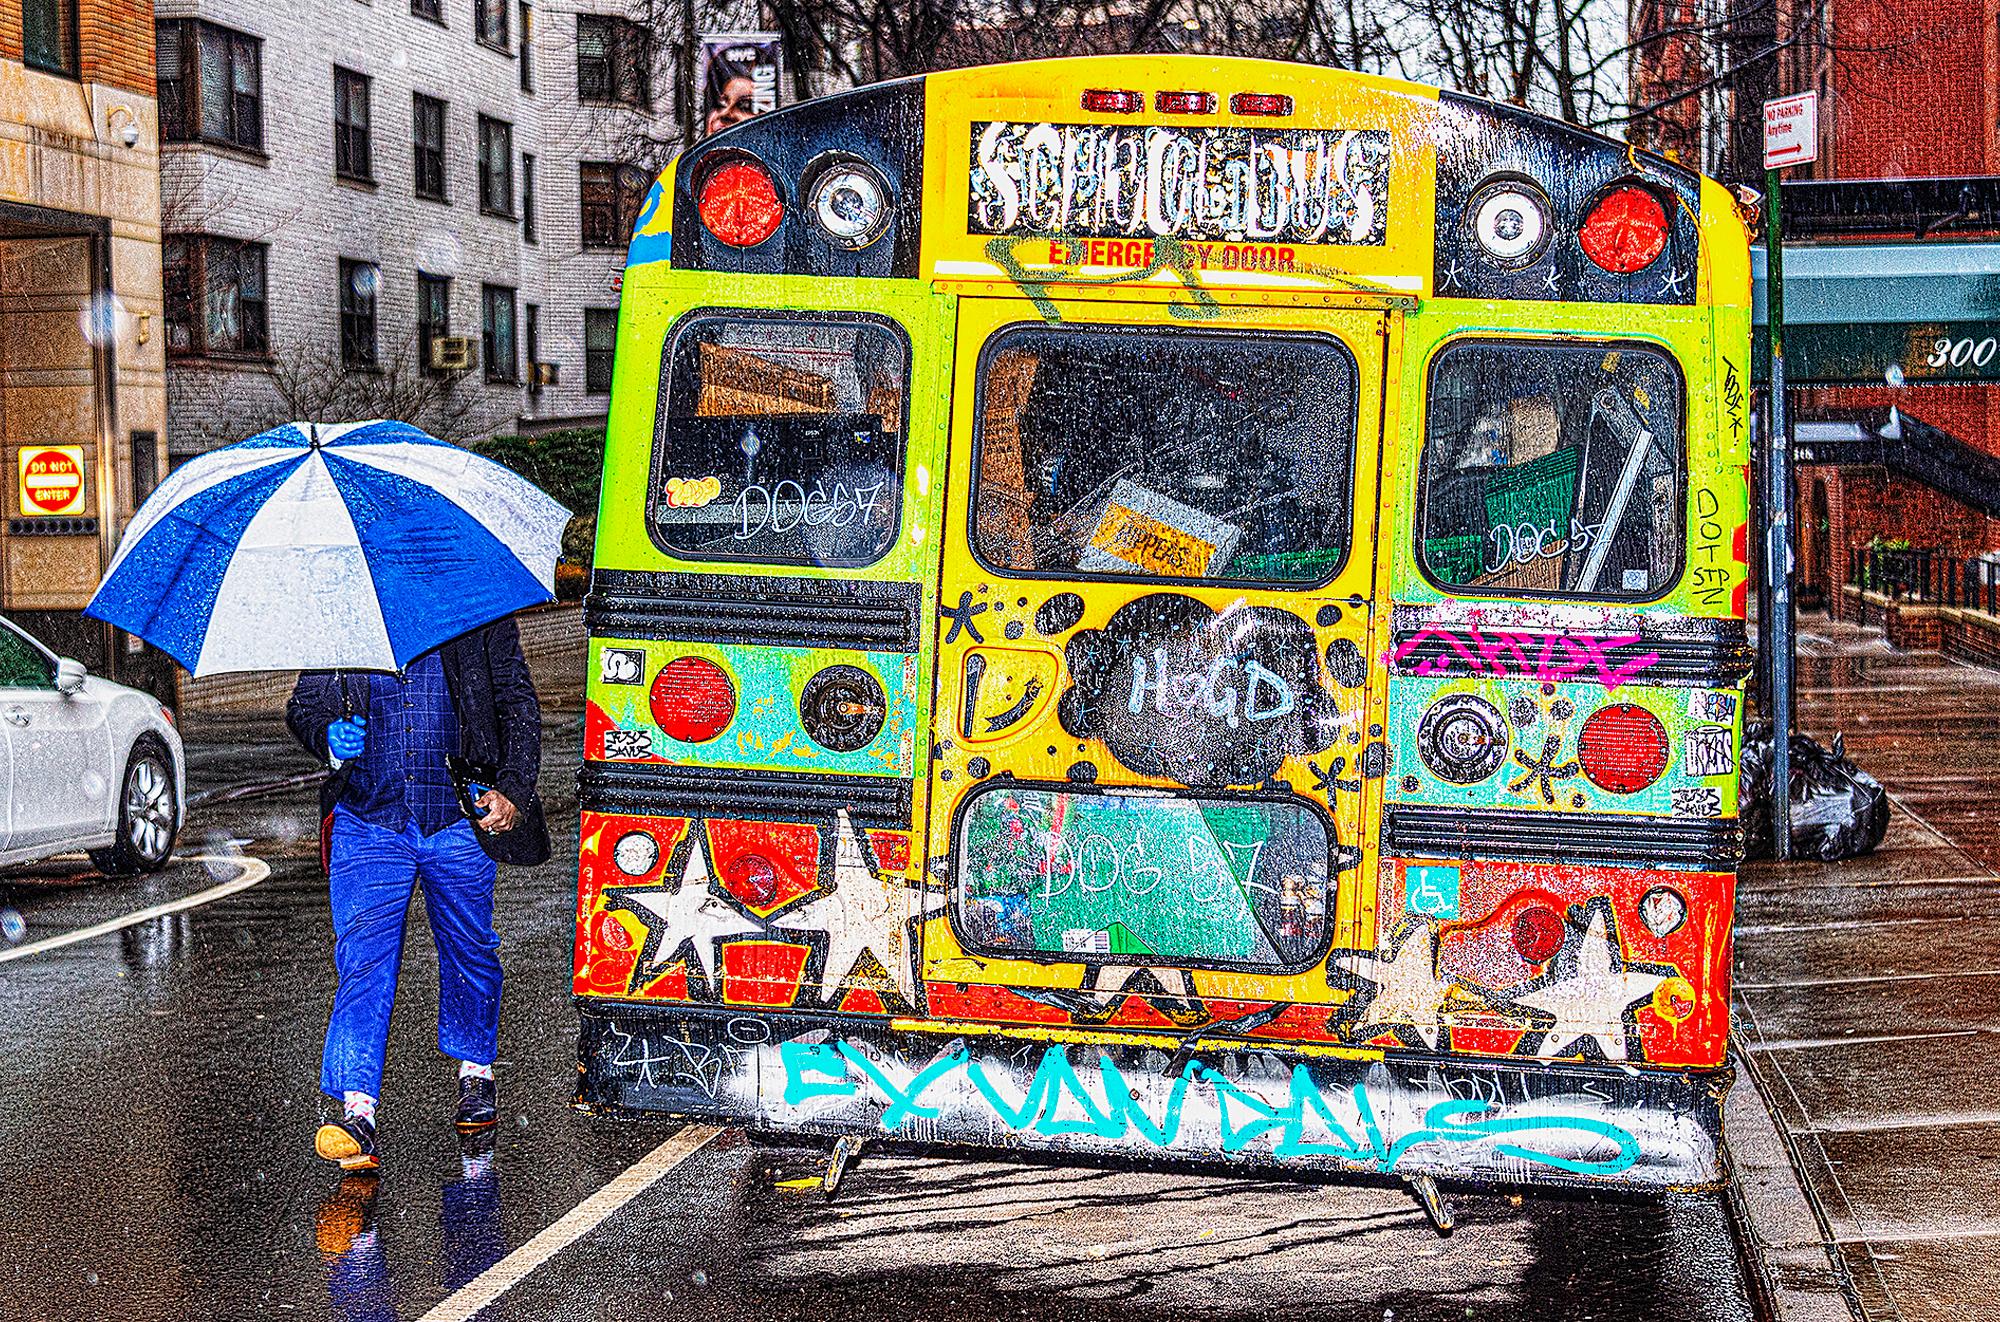 Mitchell Funk Landscape Photograph - A Contrast of Two Art Styles - Graffiti Bus & Blue Umbrella on Rainy Day 